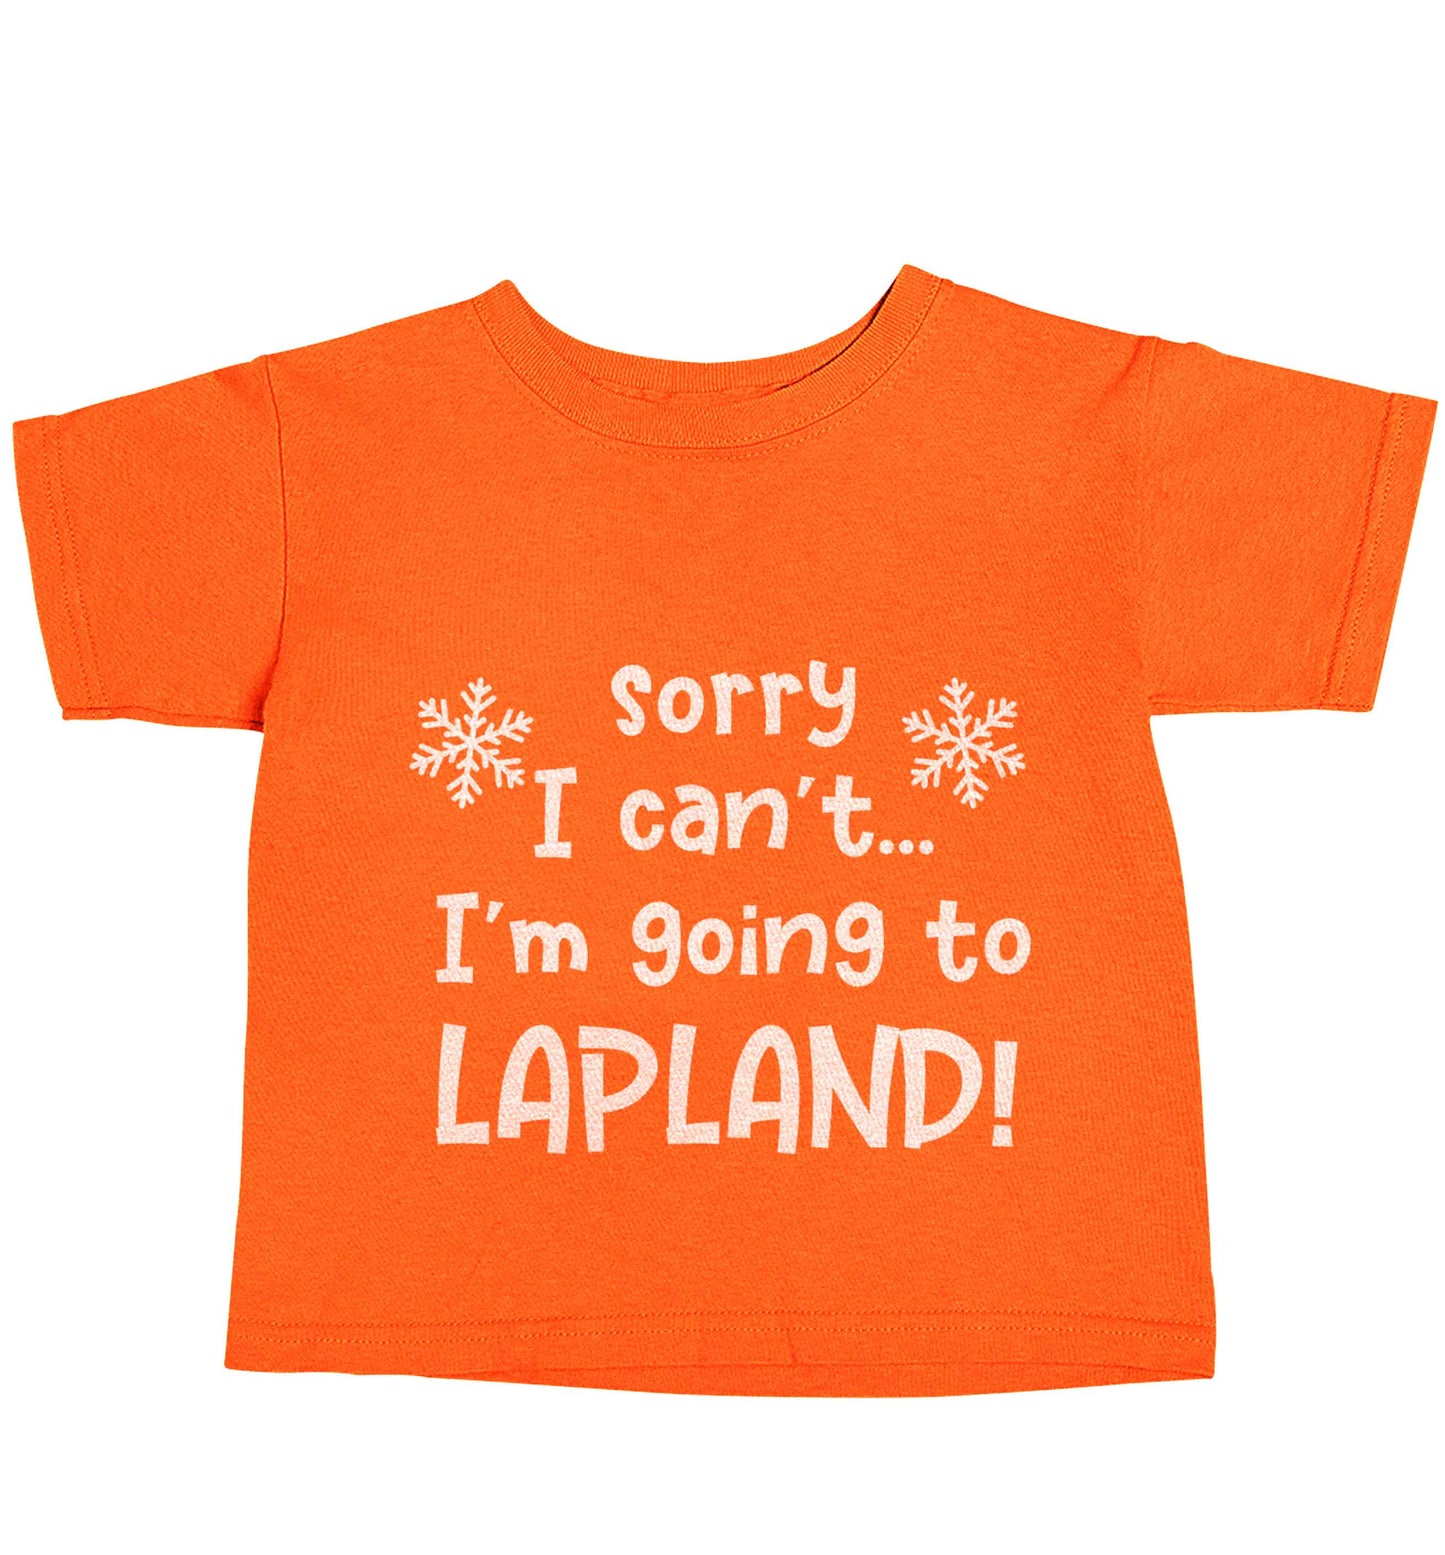 Sorry I can't I'm going to Lapland orange baby toddler Tshirt 2 Years